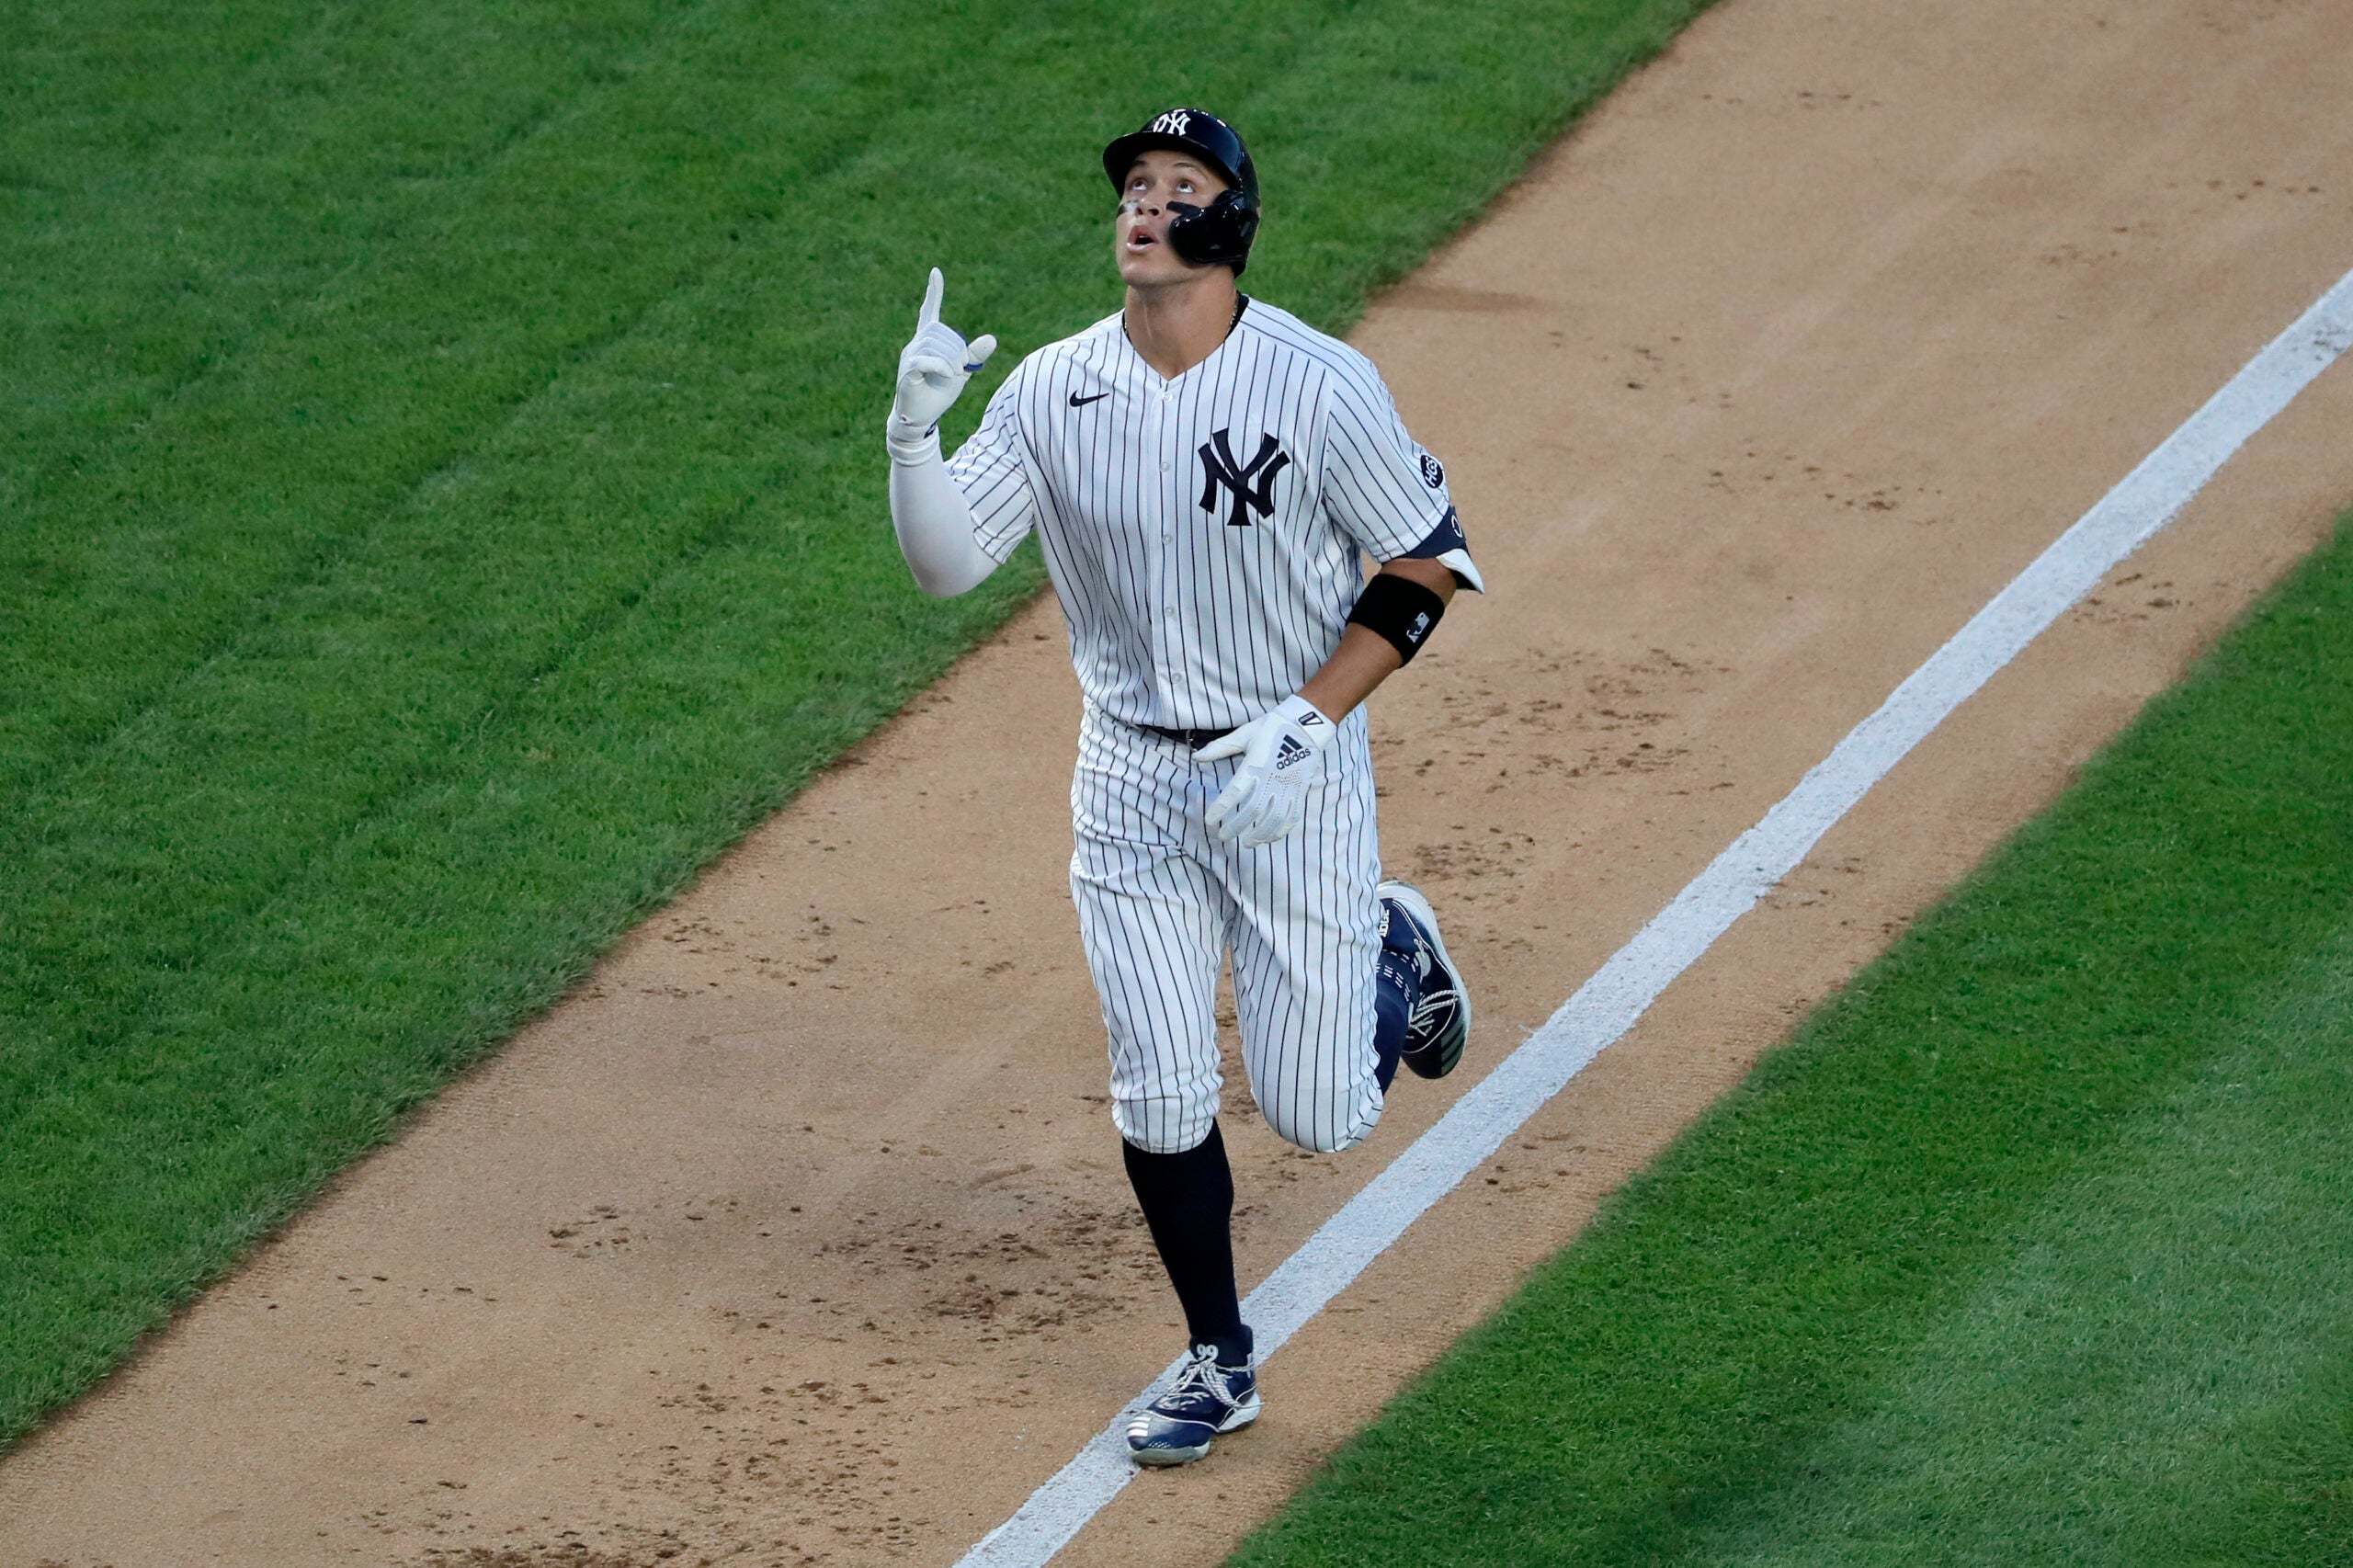 Brett Gardner may have one more NY Yankees October moment